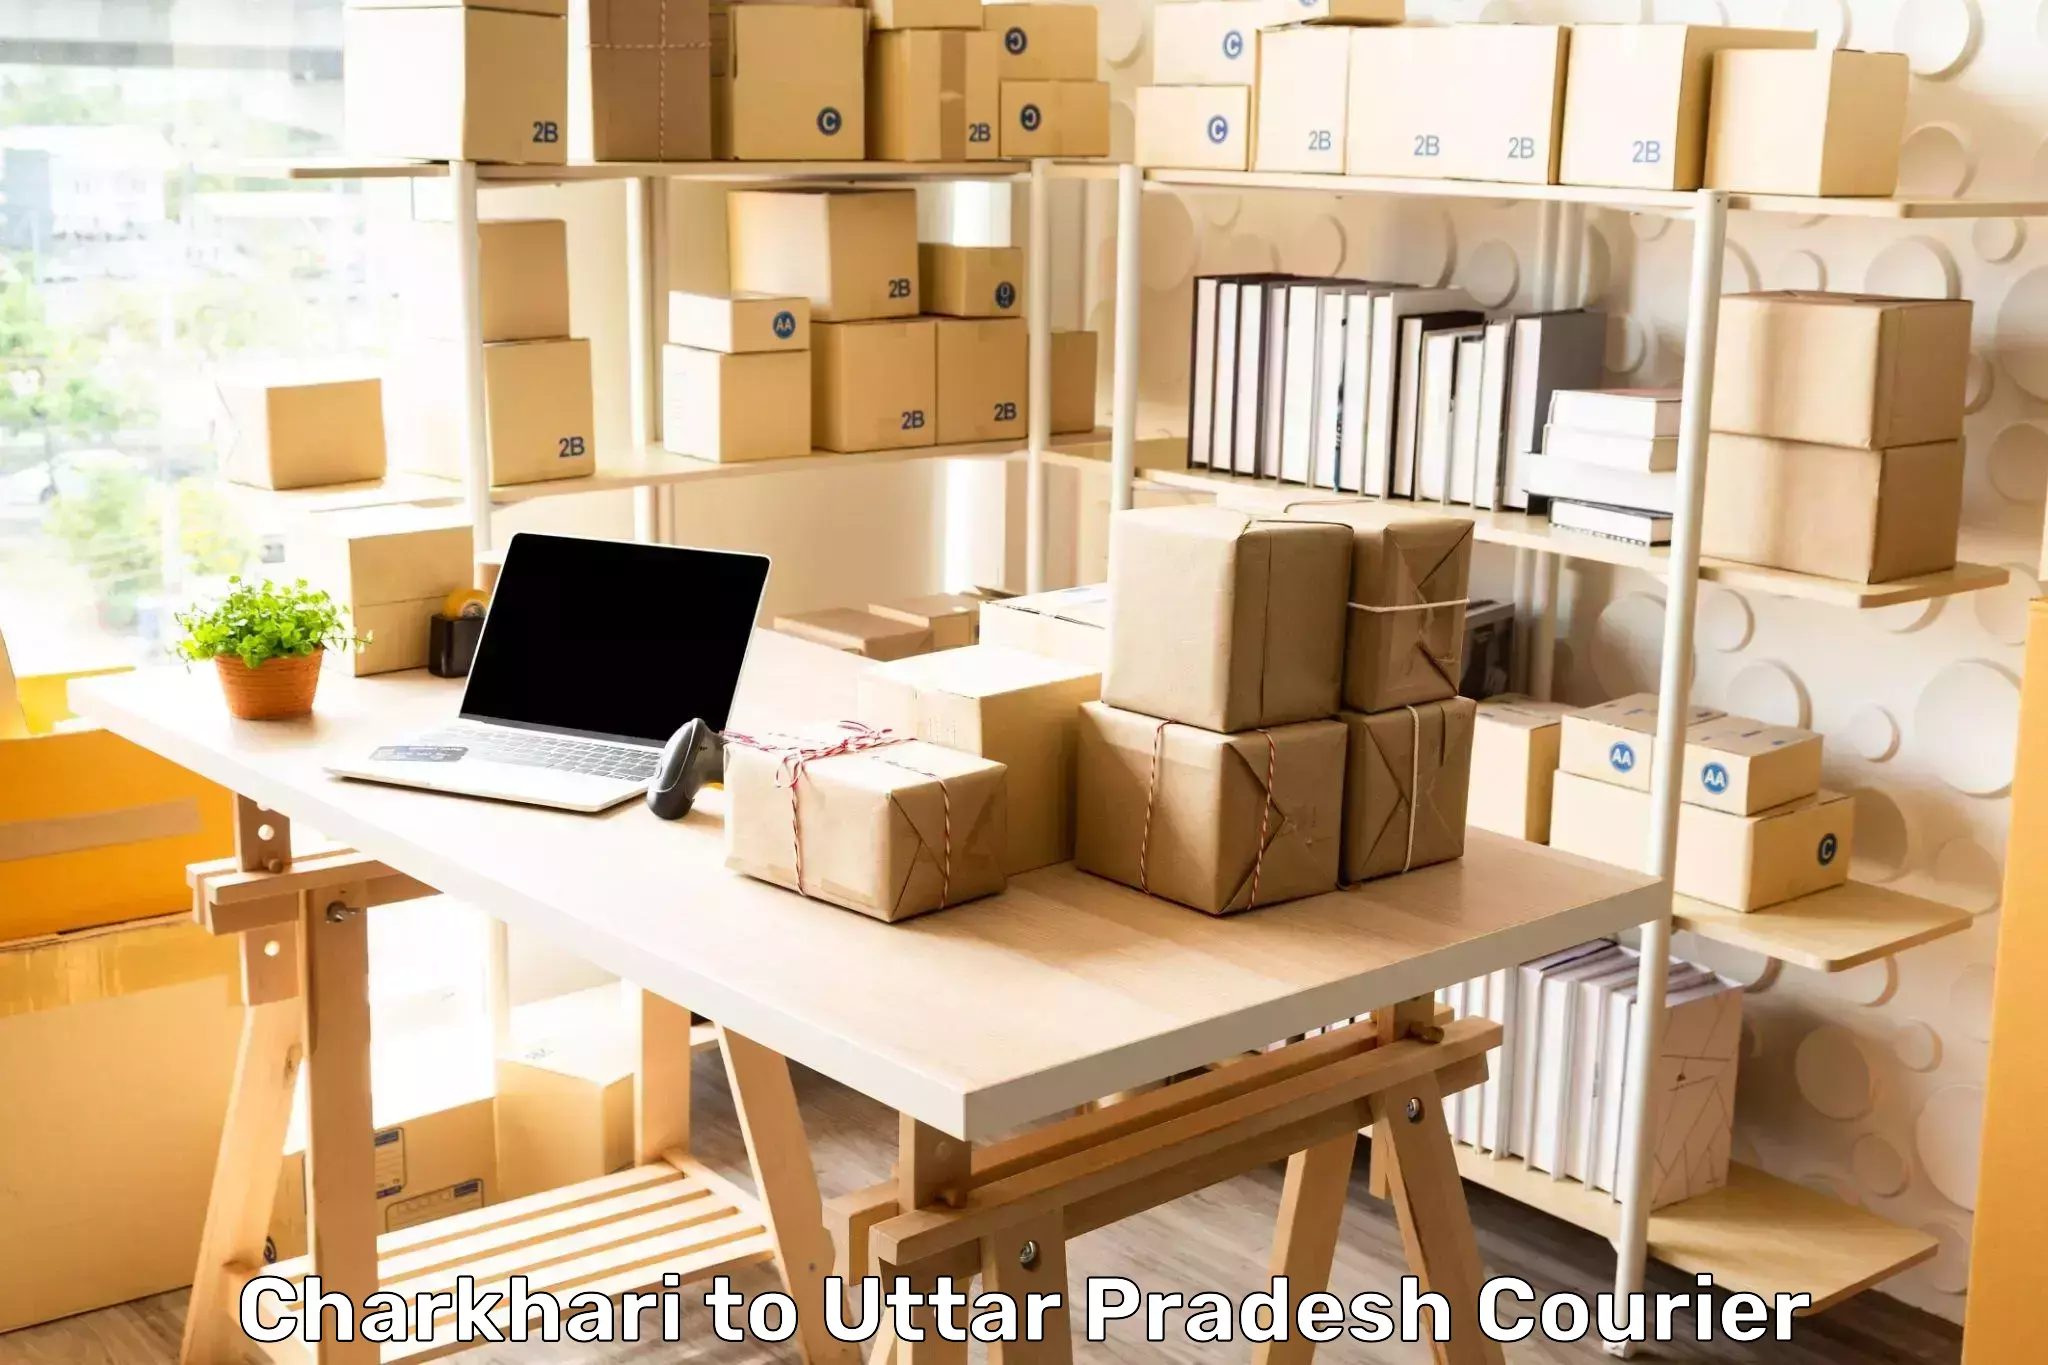 Courier service booking in Charkhari to Sultanpur Avadh